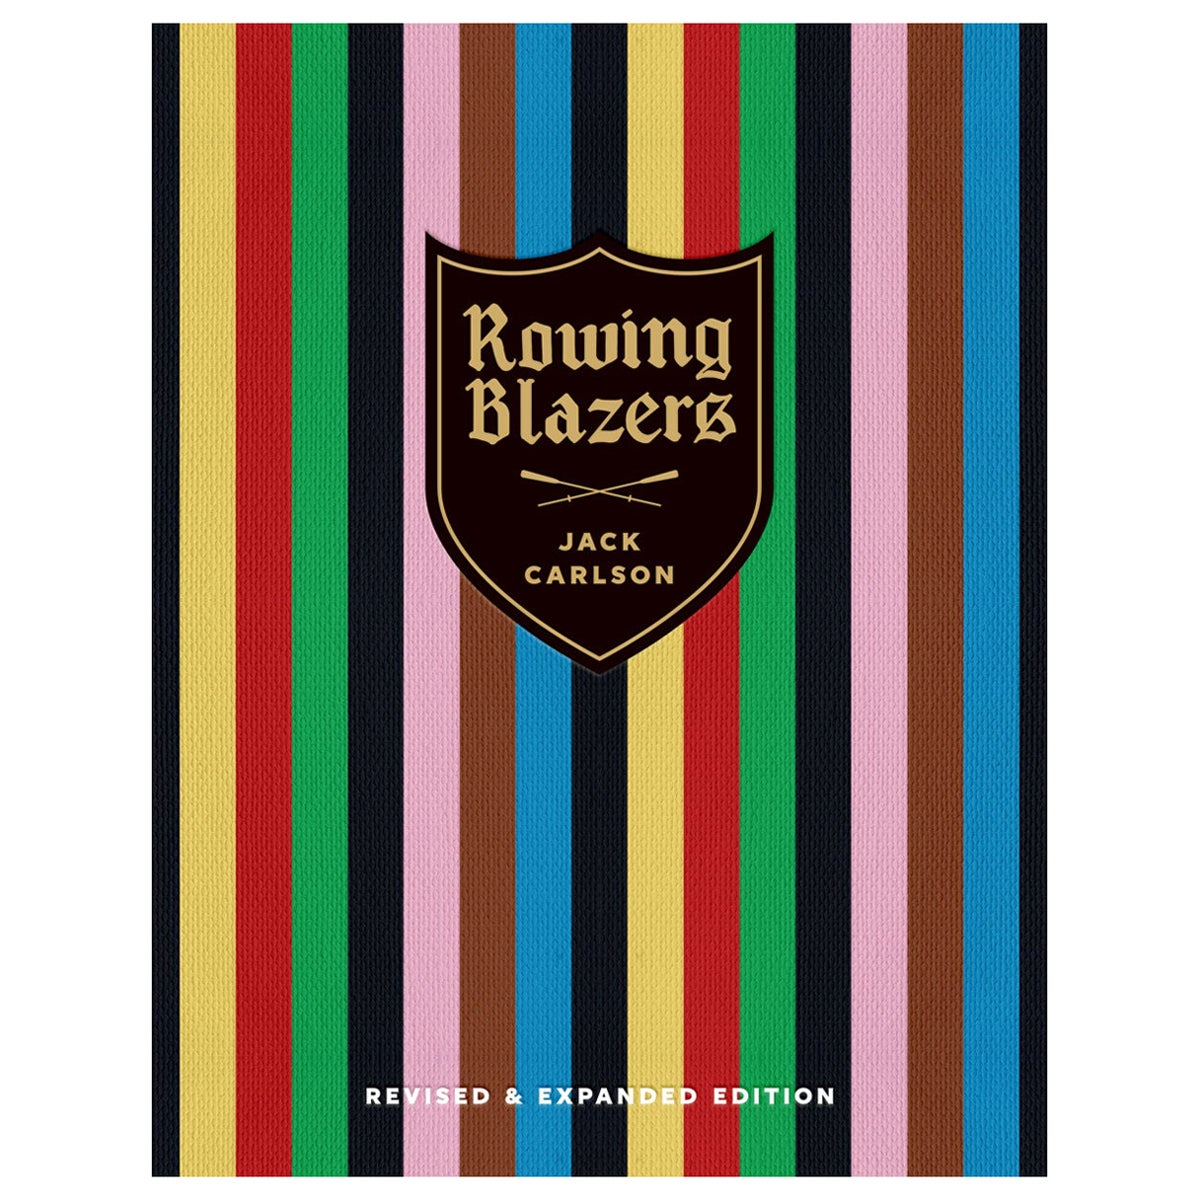 Rowing Blazers Revised and Expanded Edition Book in Hardcover by Jack Carlson For Sale